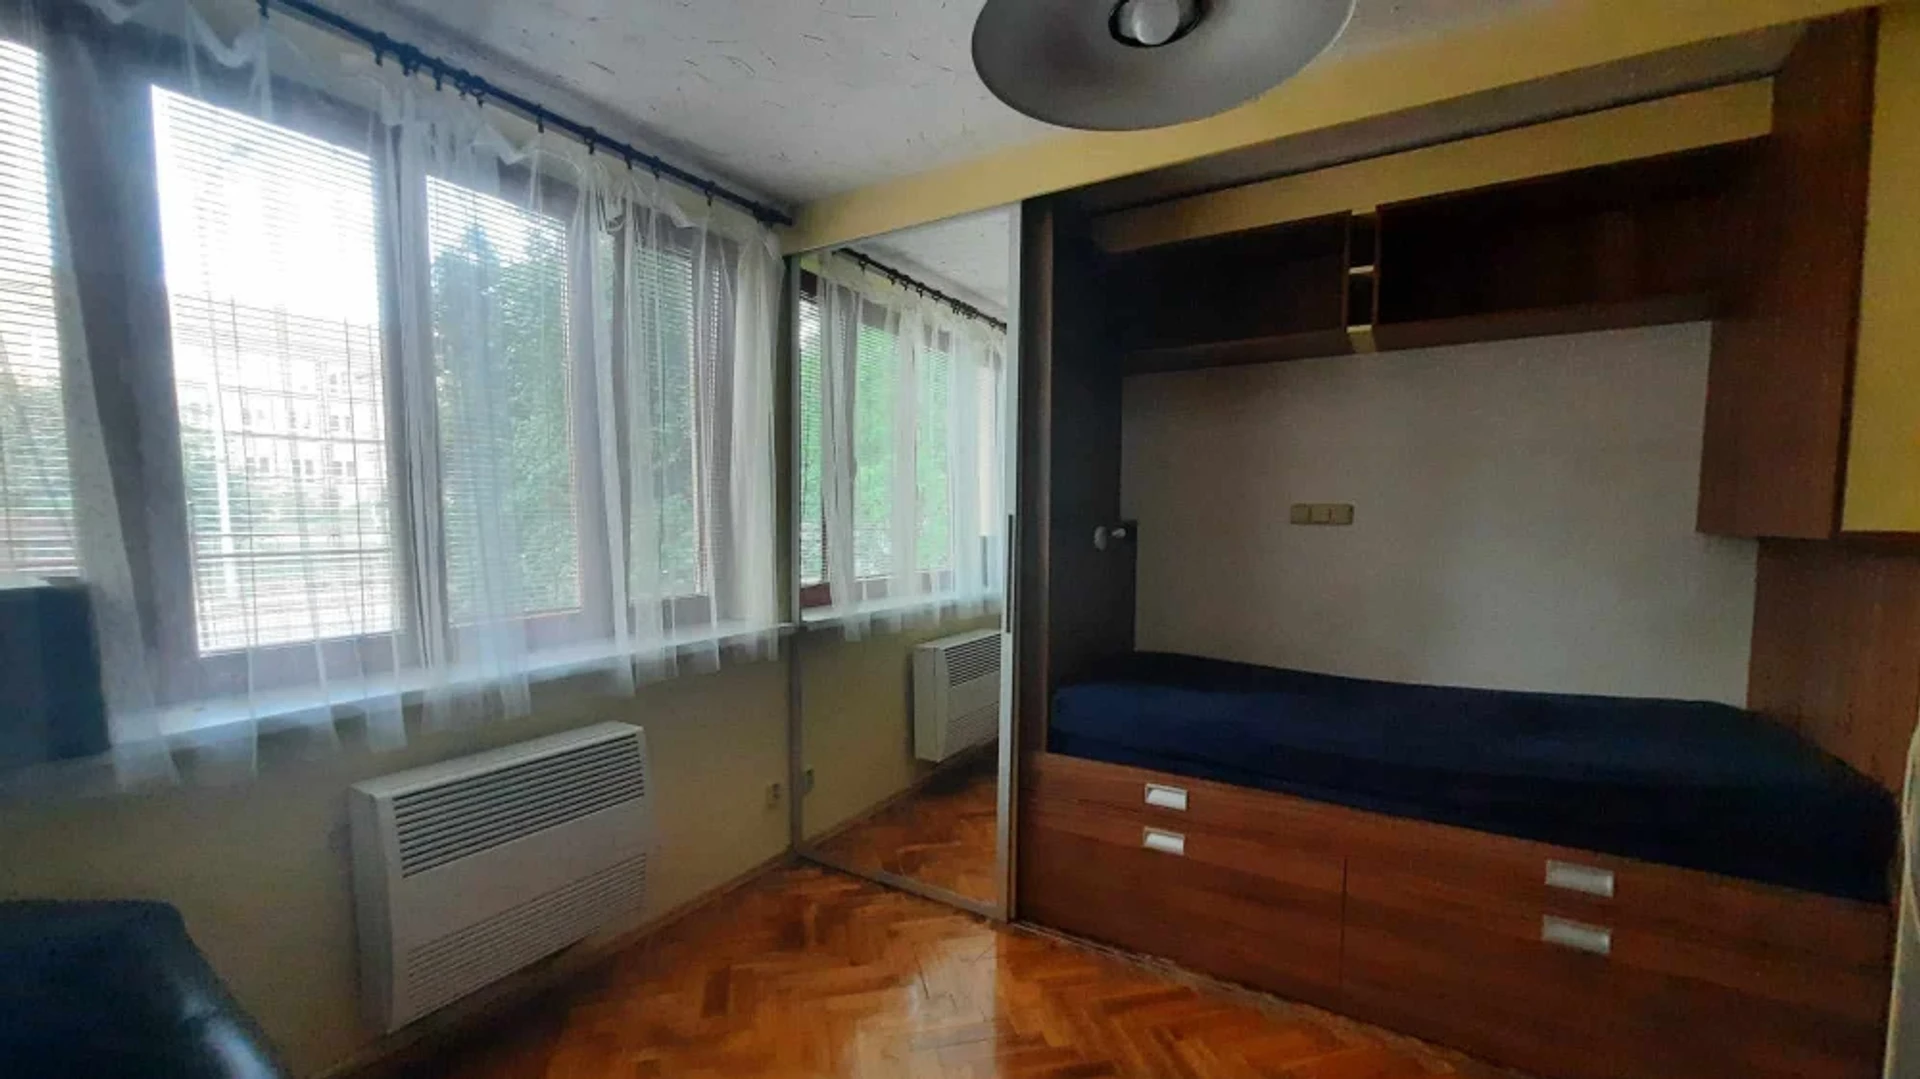 Accommodation with 3 bedrooms in Brno